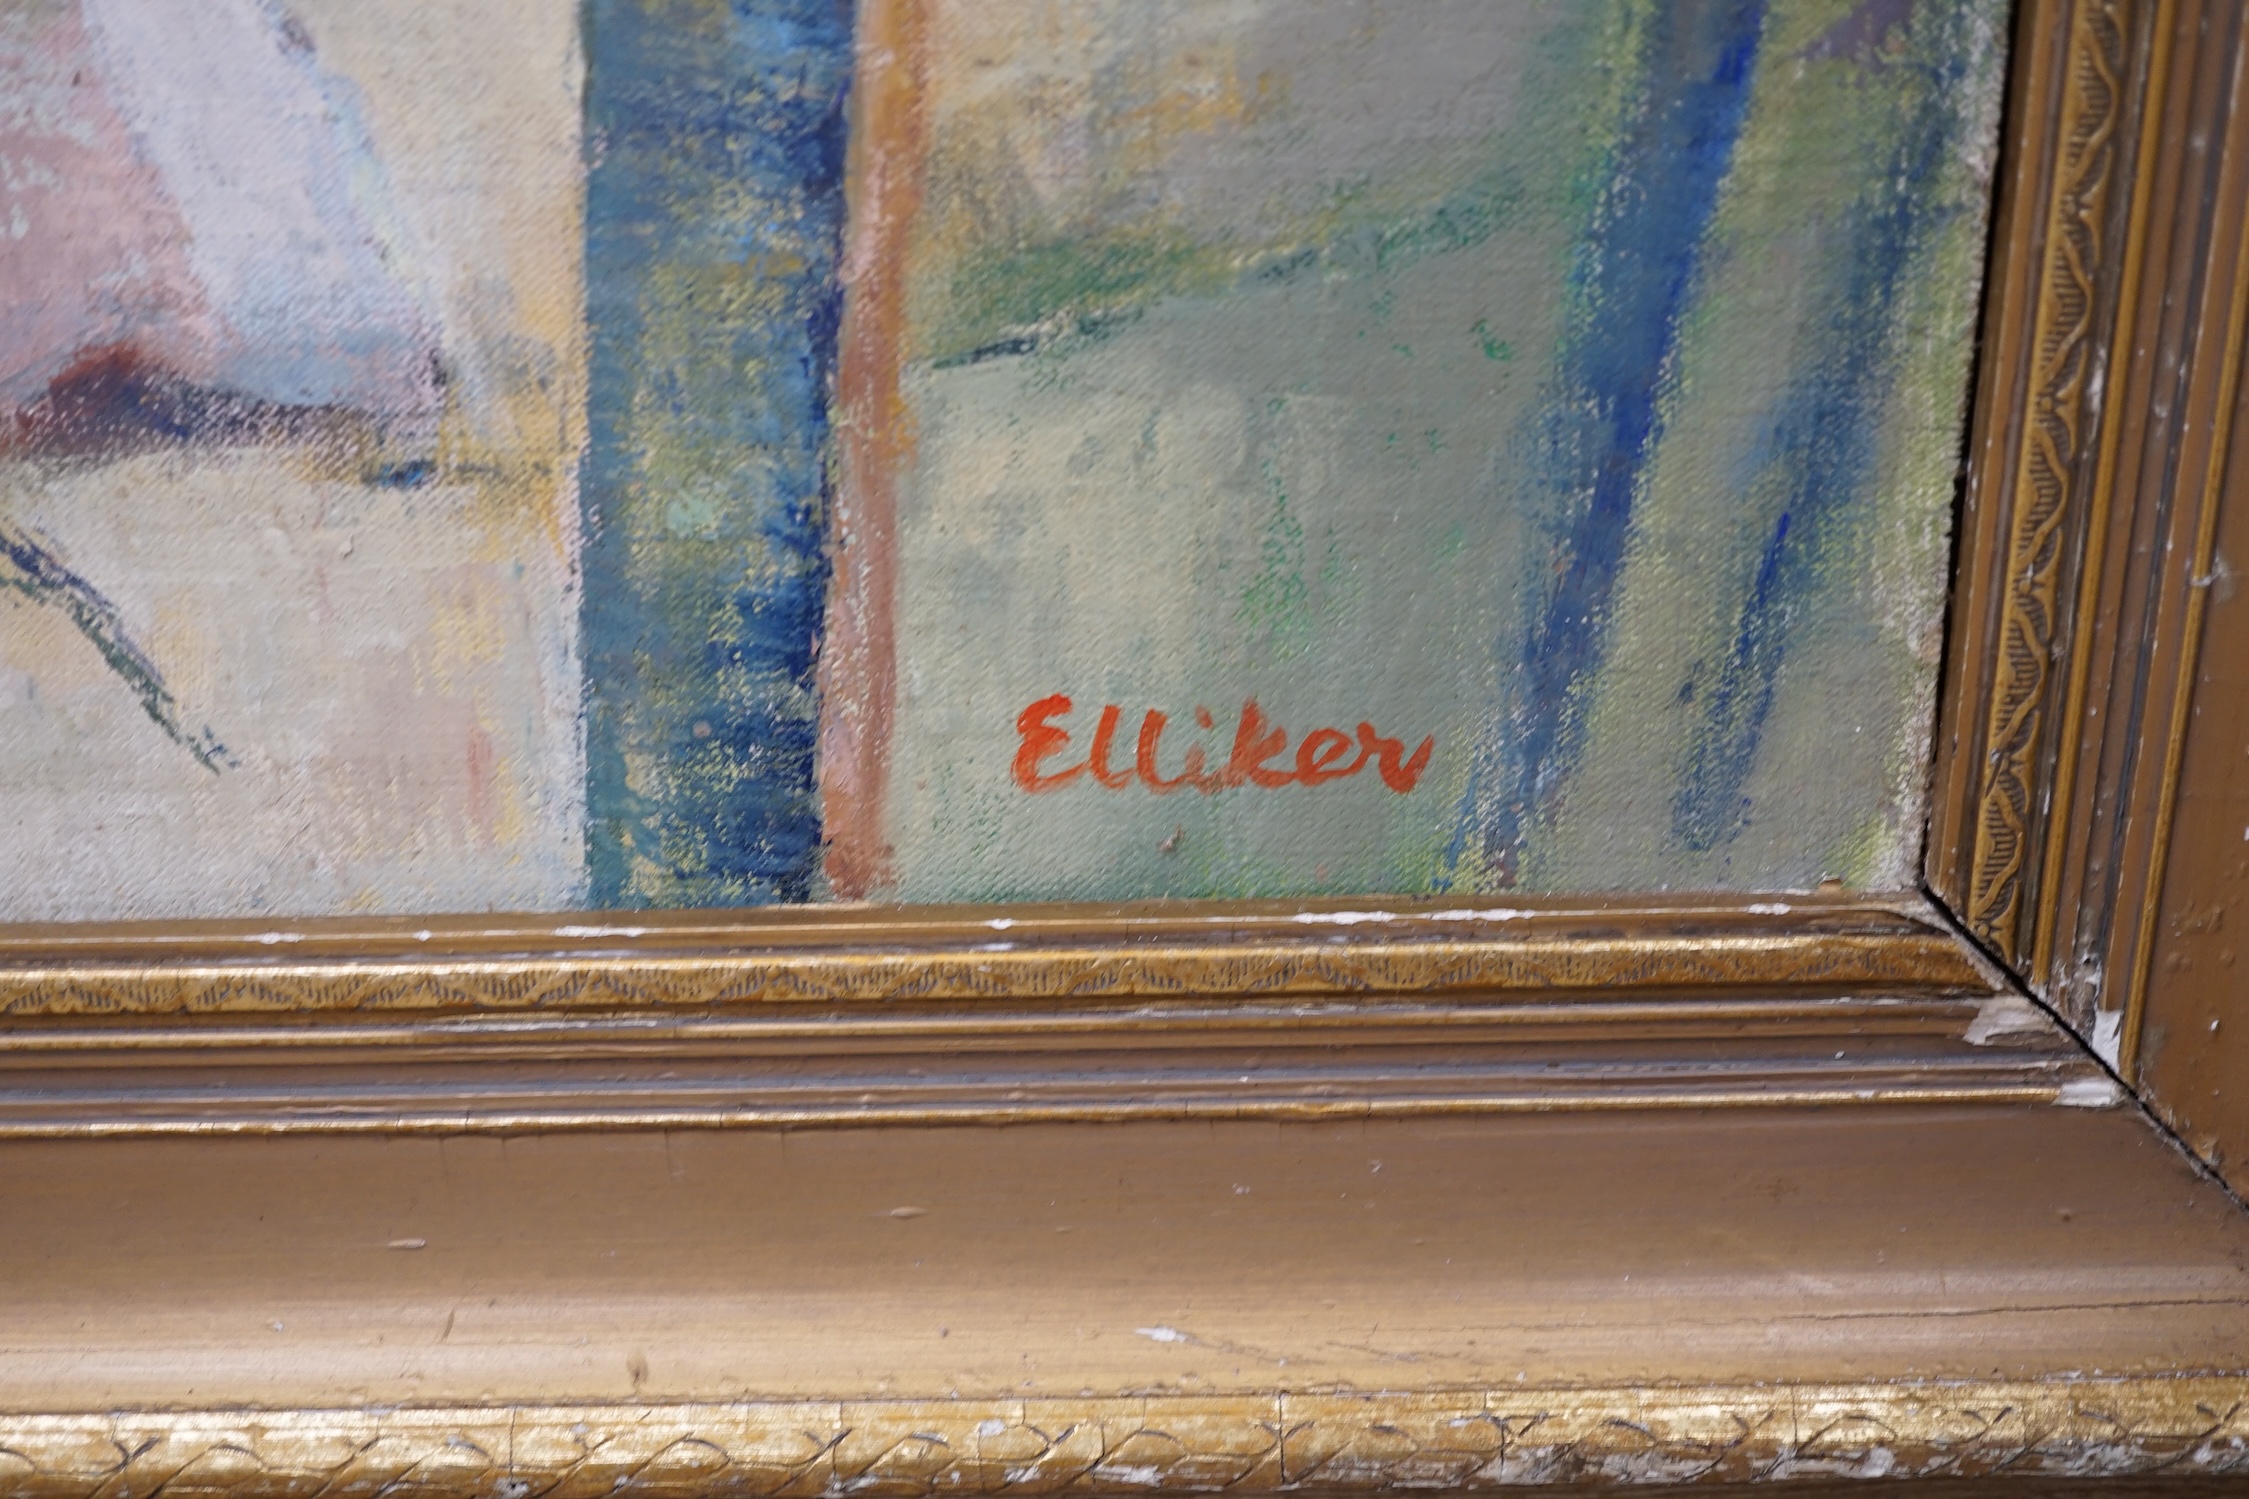 Elliker, oil on board, Half length portrait of a seated elderly lady, signed, 74 x 50cm. Condition - fair to good